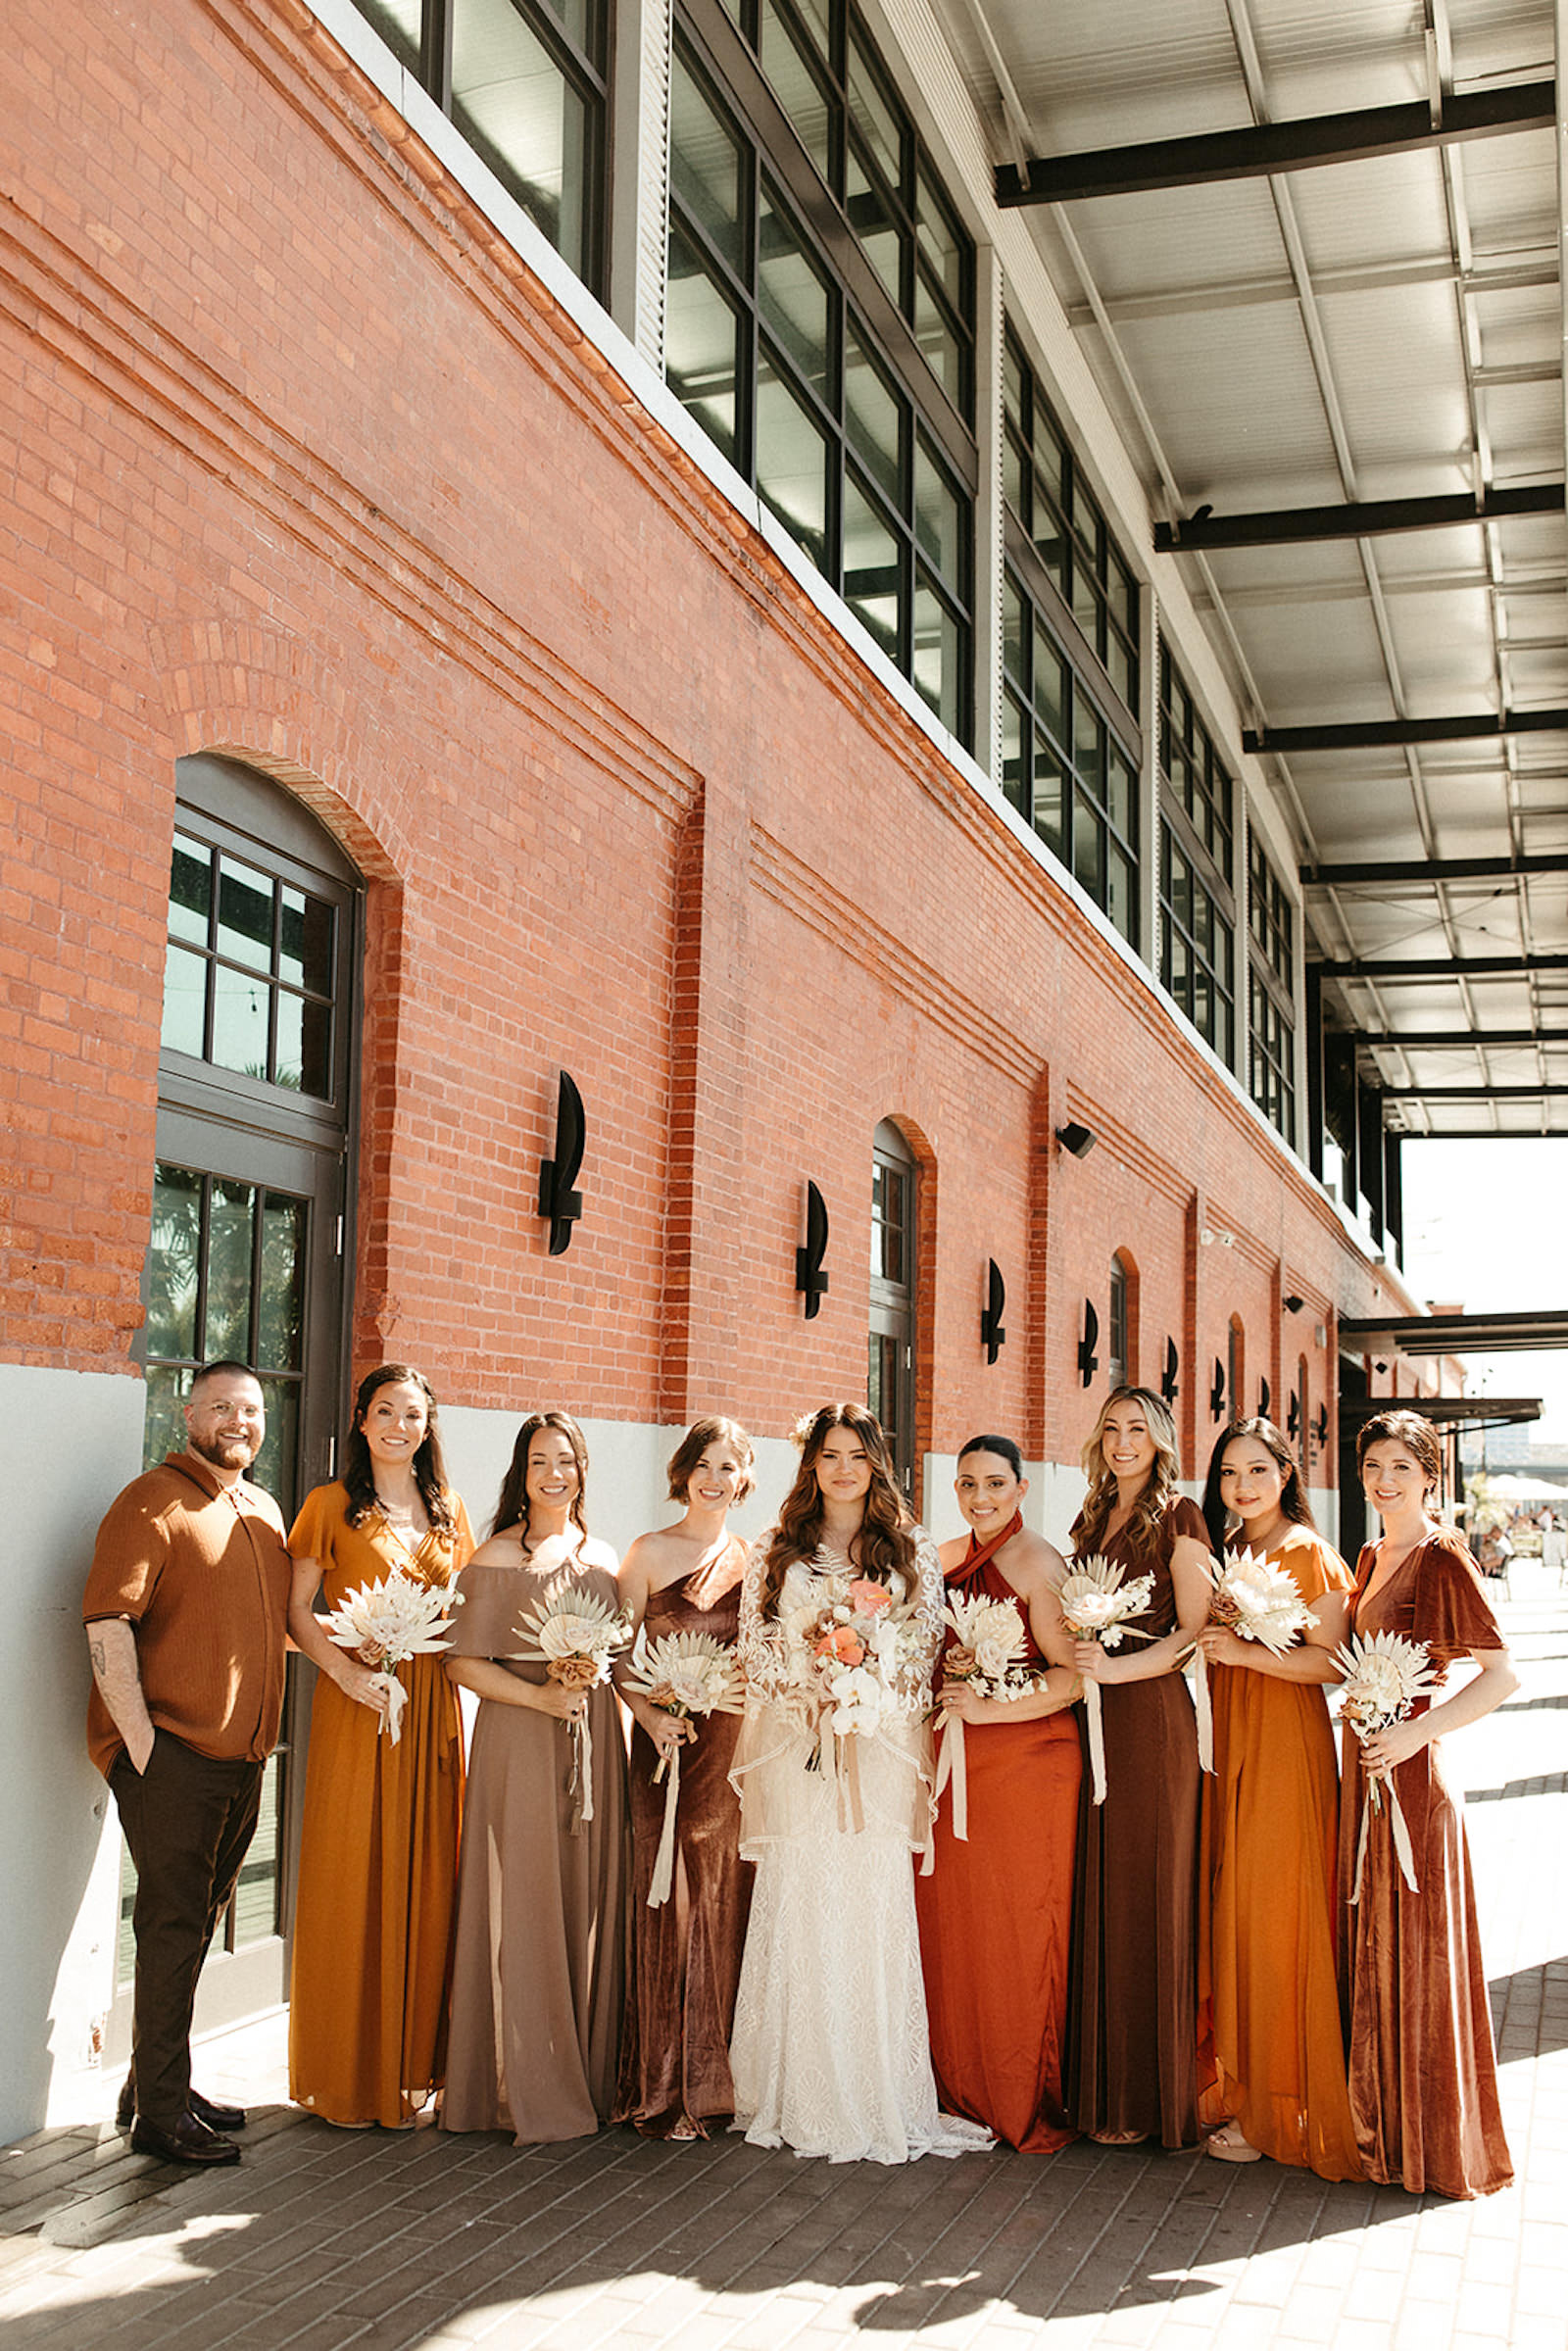 Earthy Neutral Boho Modern Chic Bridal Party, Bridesmaids Wearing Mix and Match Terracotta, Gold and Bronze Dresses | Tampa Bay Wedding Venue Armature Works